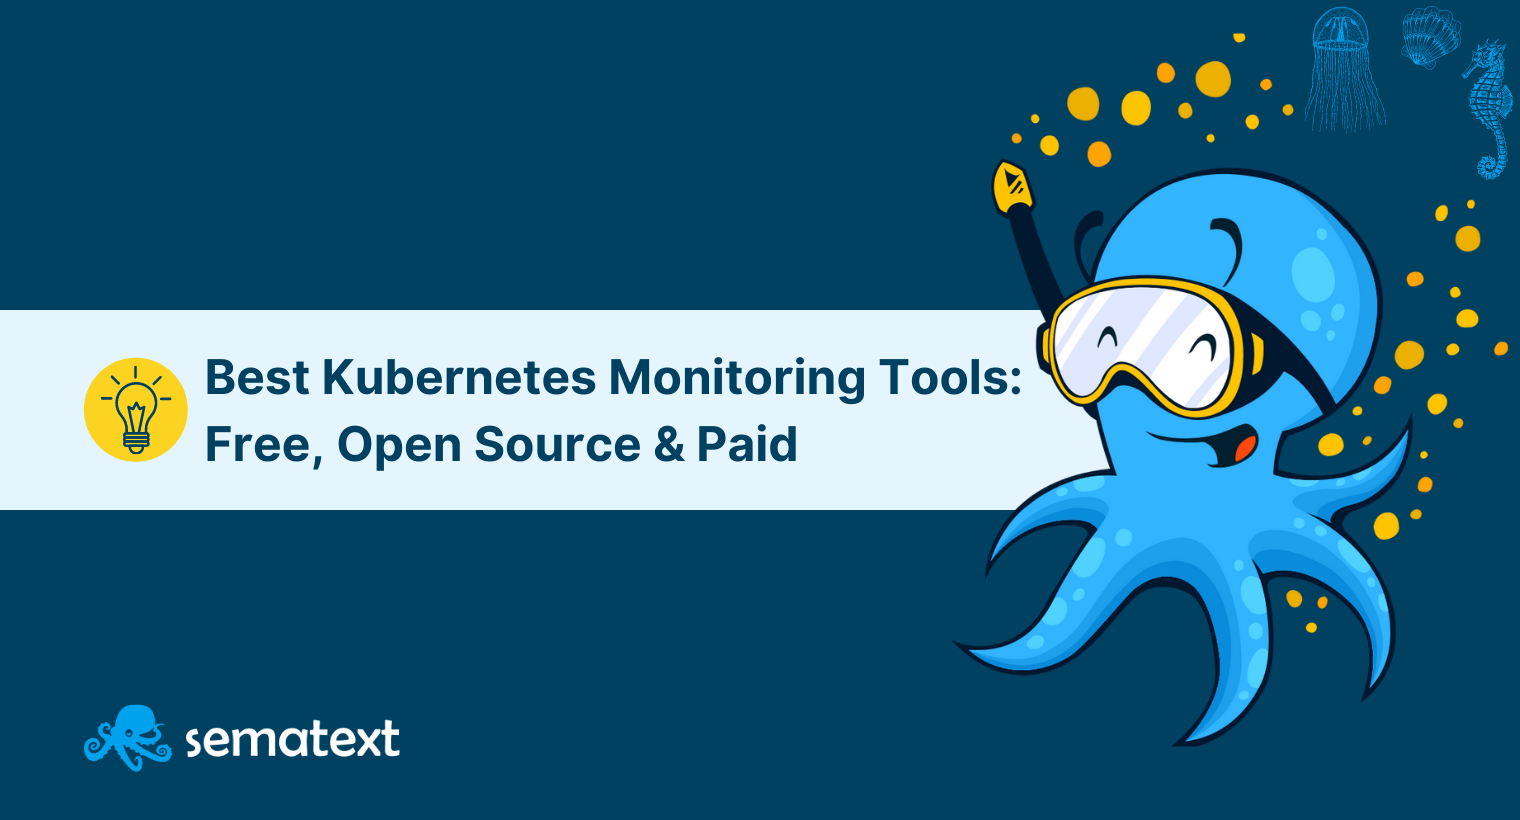 13 Best Kubernetes Monitoring Tools: Free, Open Source & Paid [2022 Comparison]